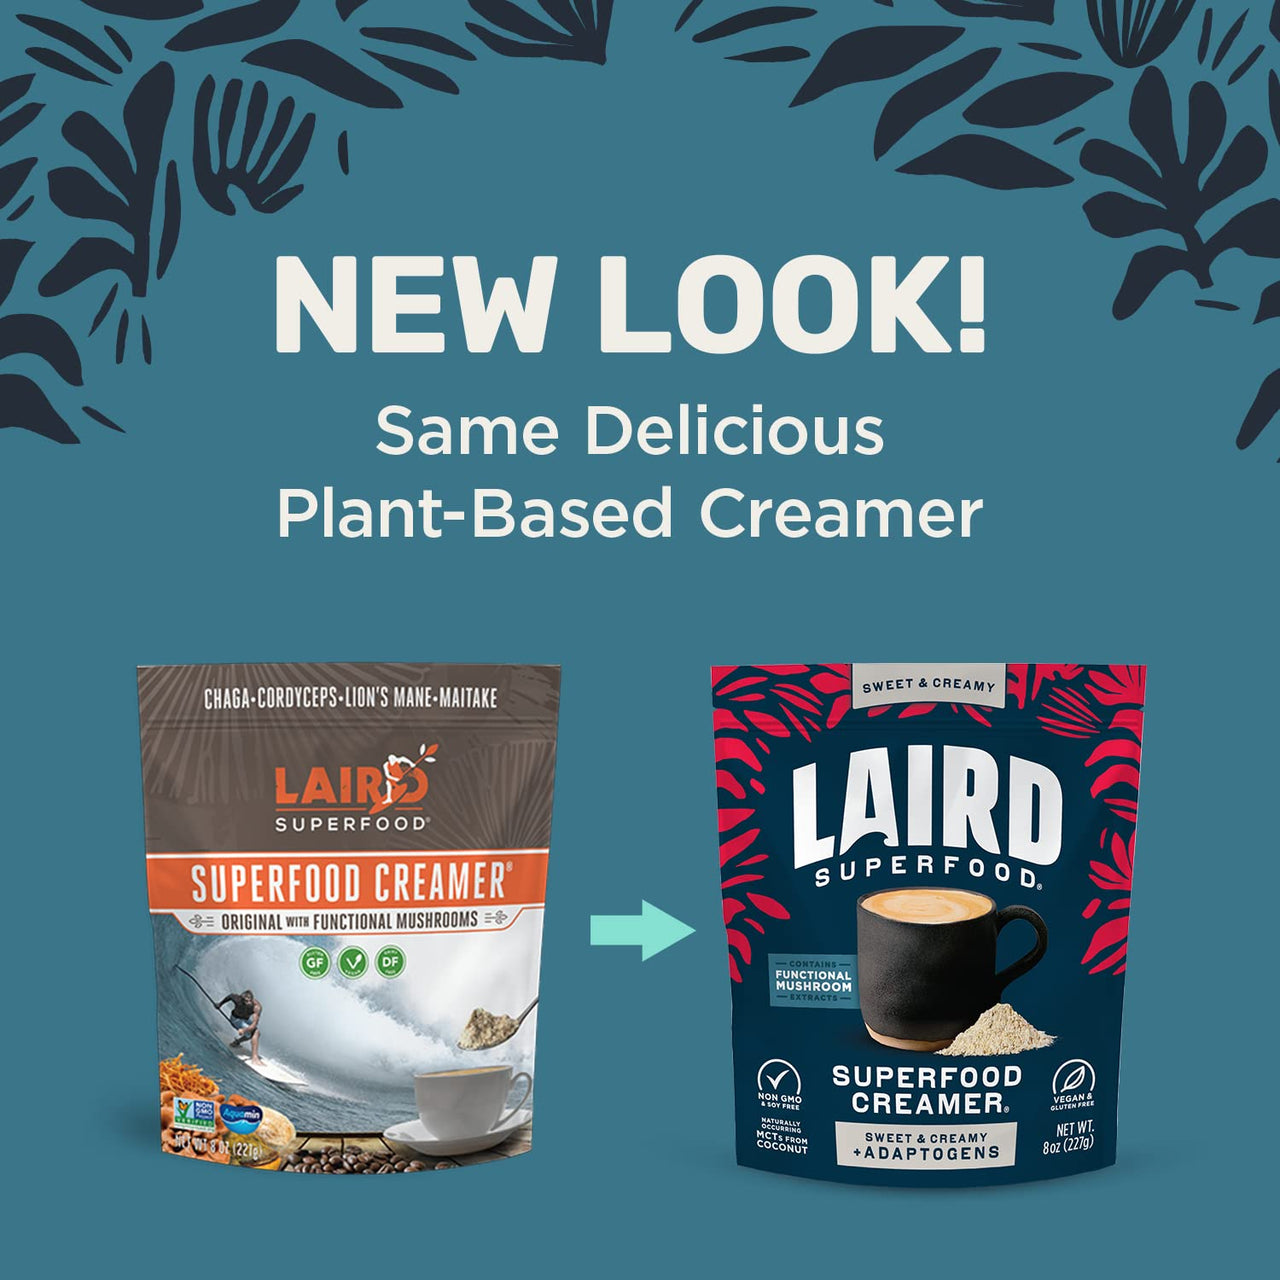 Laird Superfood Creamer® - Sweet & Creamy with Adaptogens new look